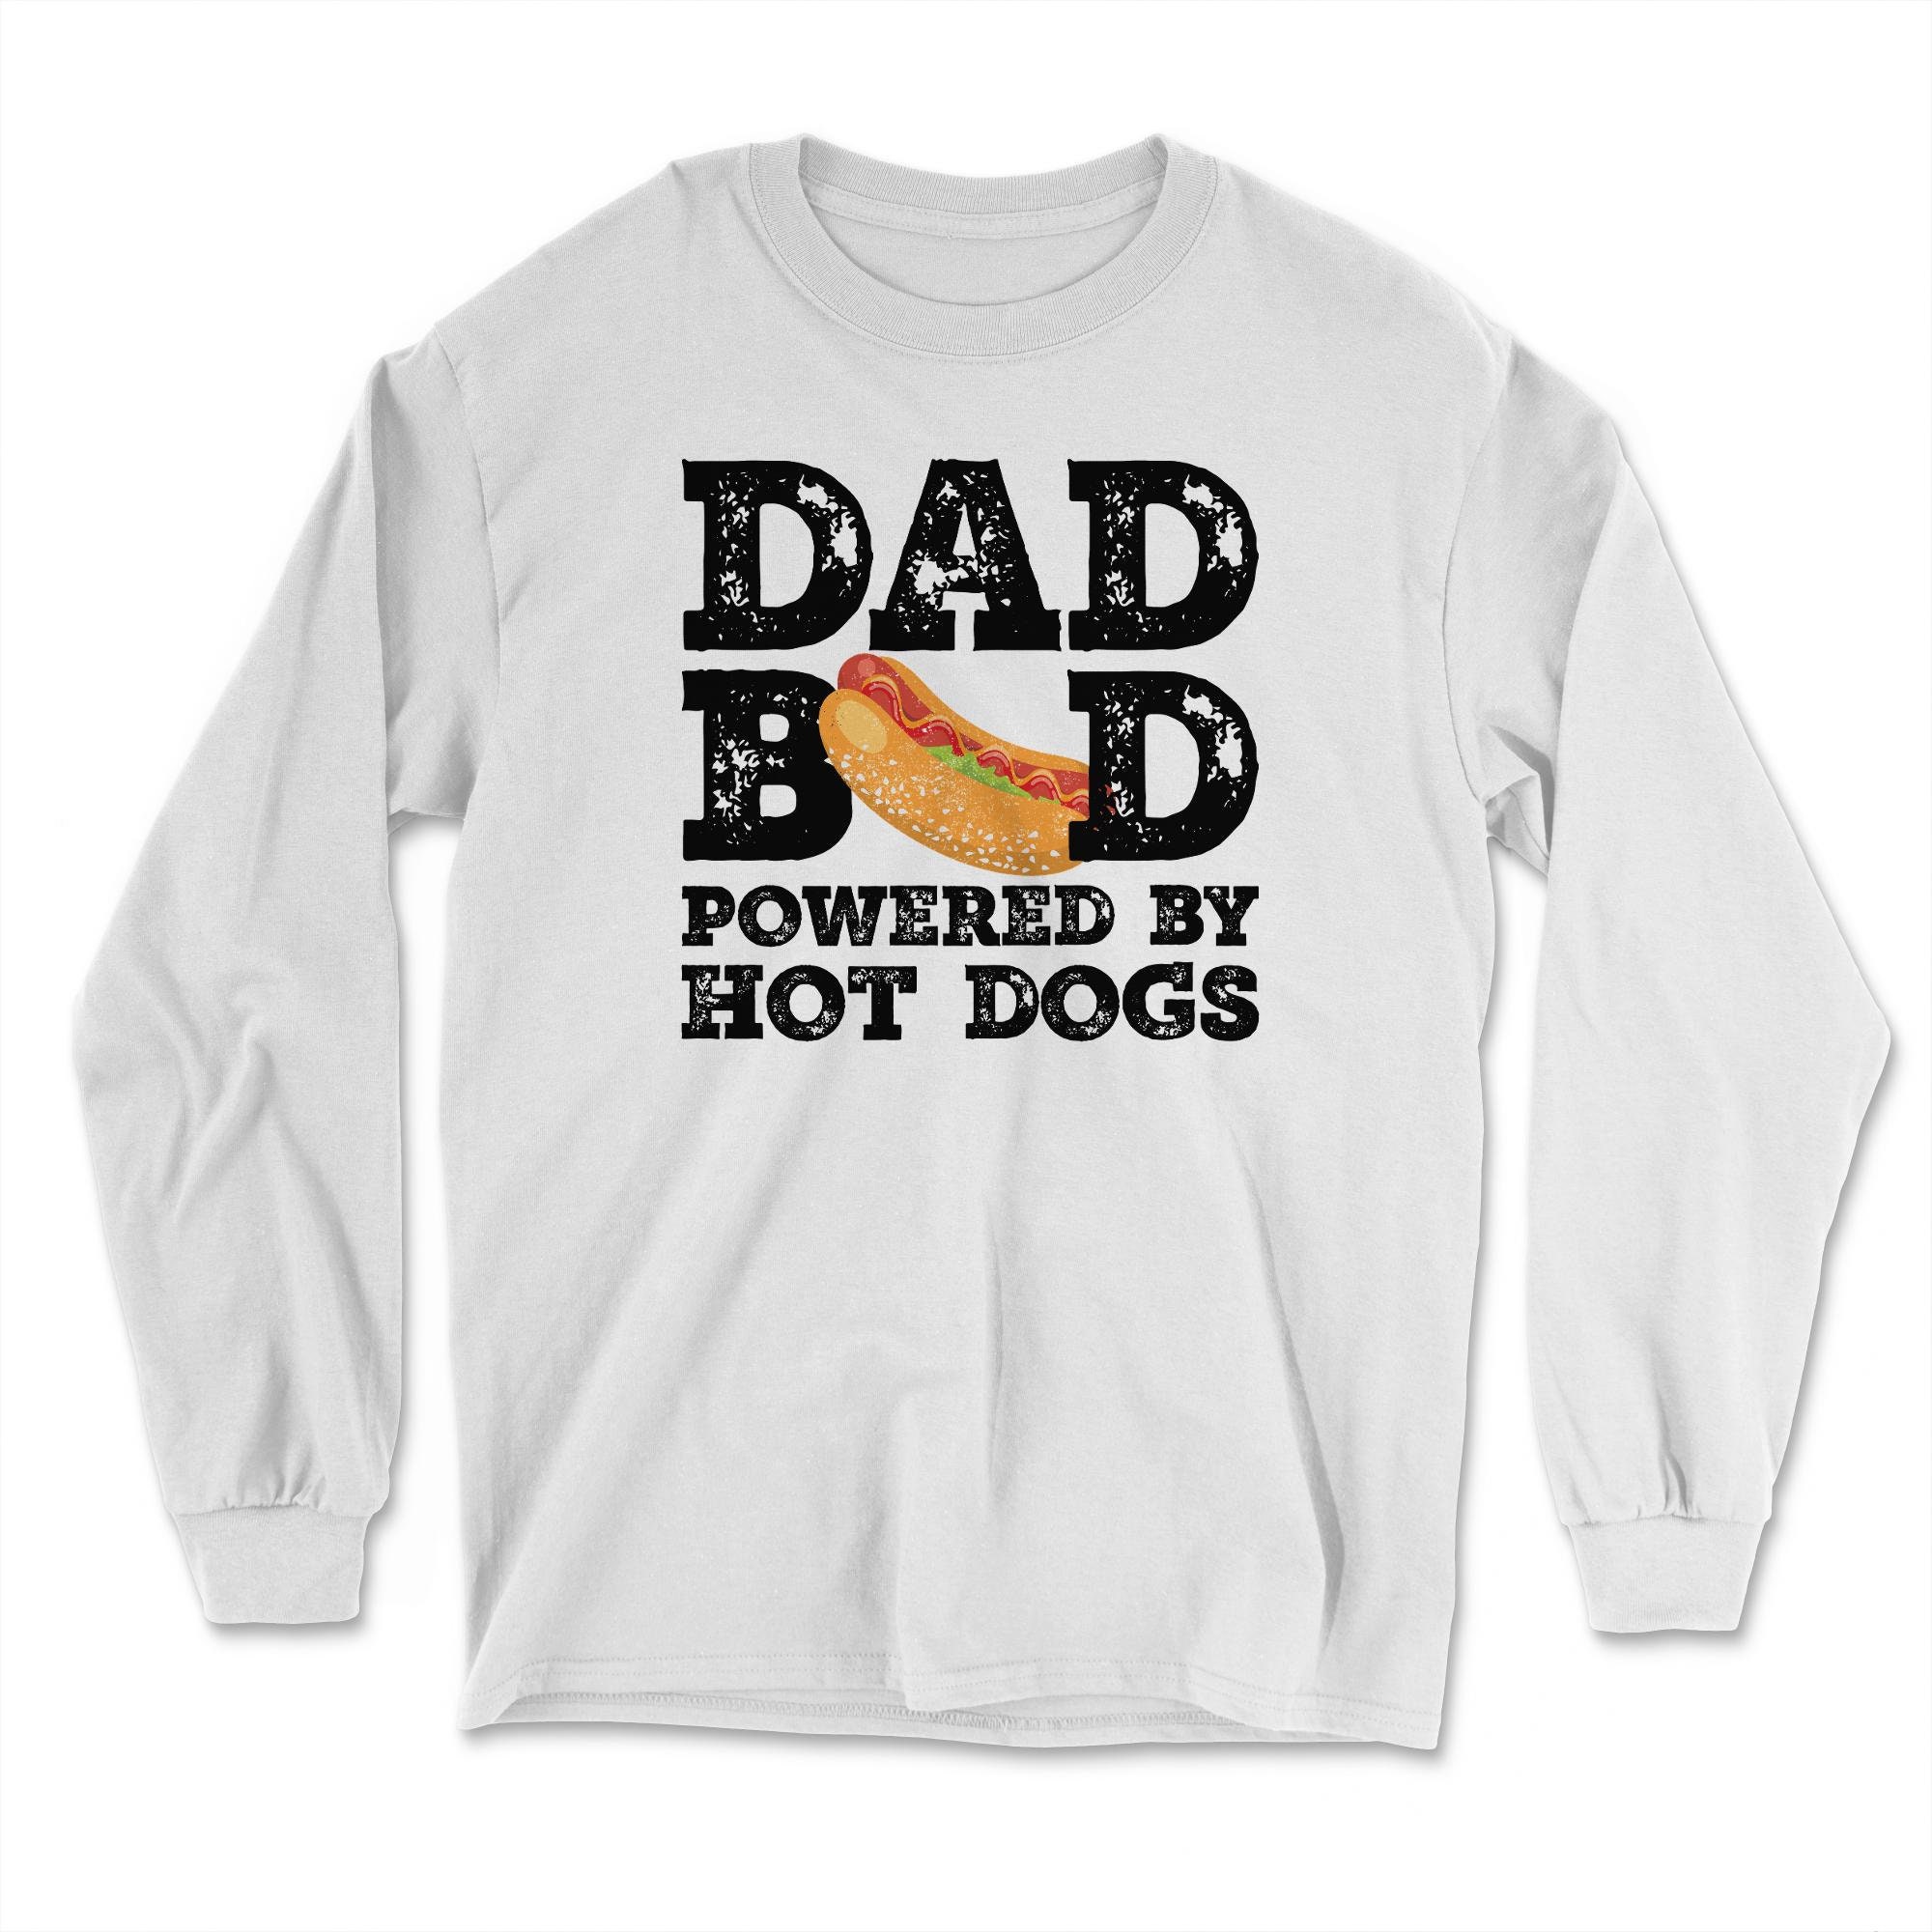 Dad Bod Powered By Hot Dogs Father Figure Gifts Idea with | Etsy